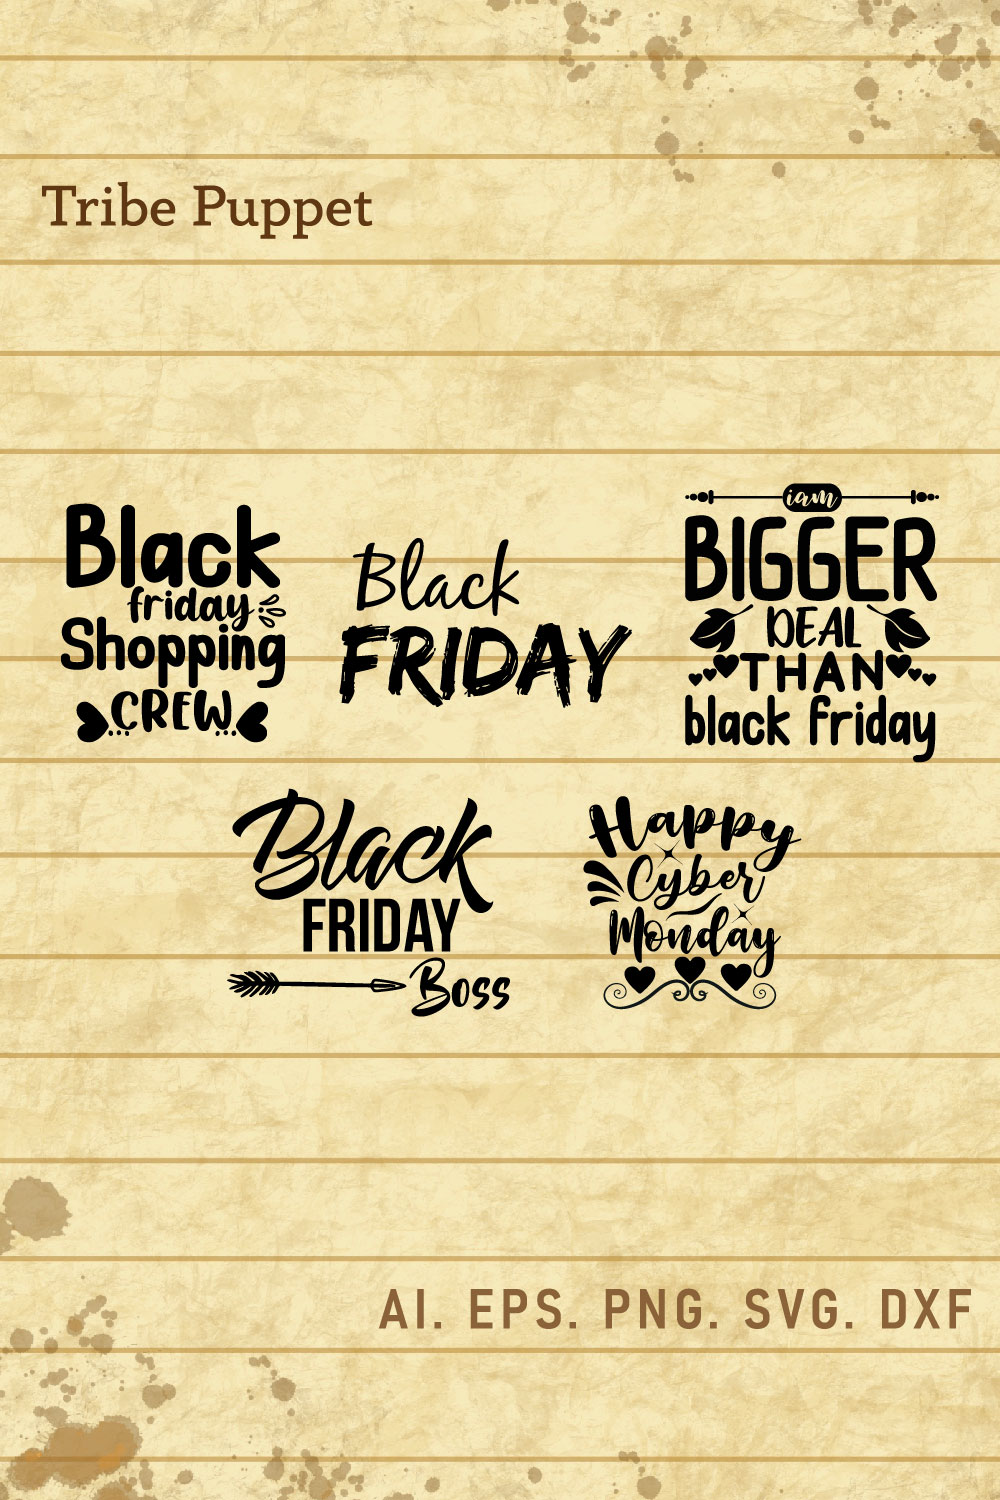 Black Friday pinterest preview image.